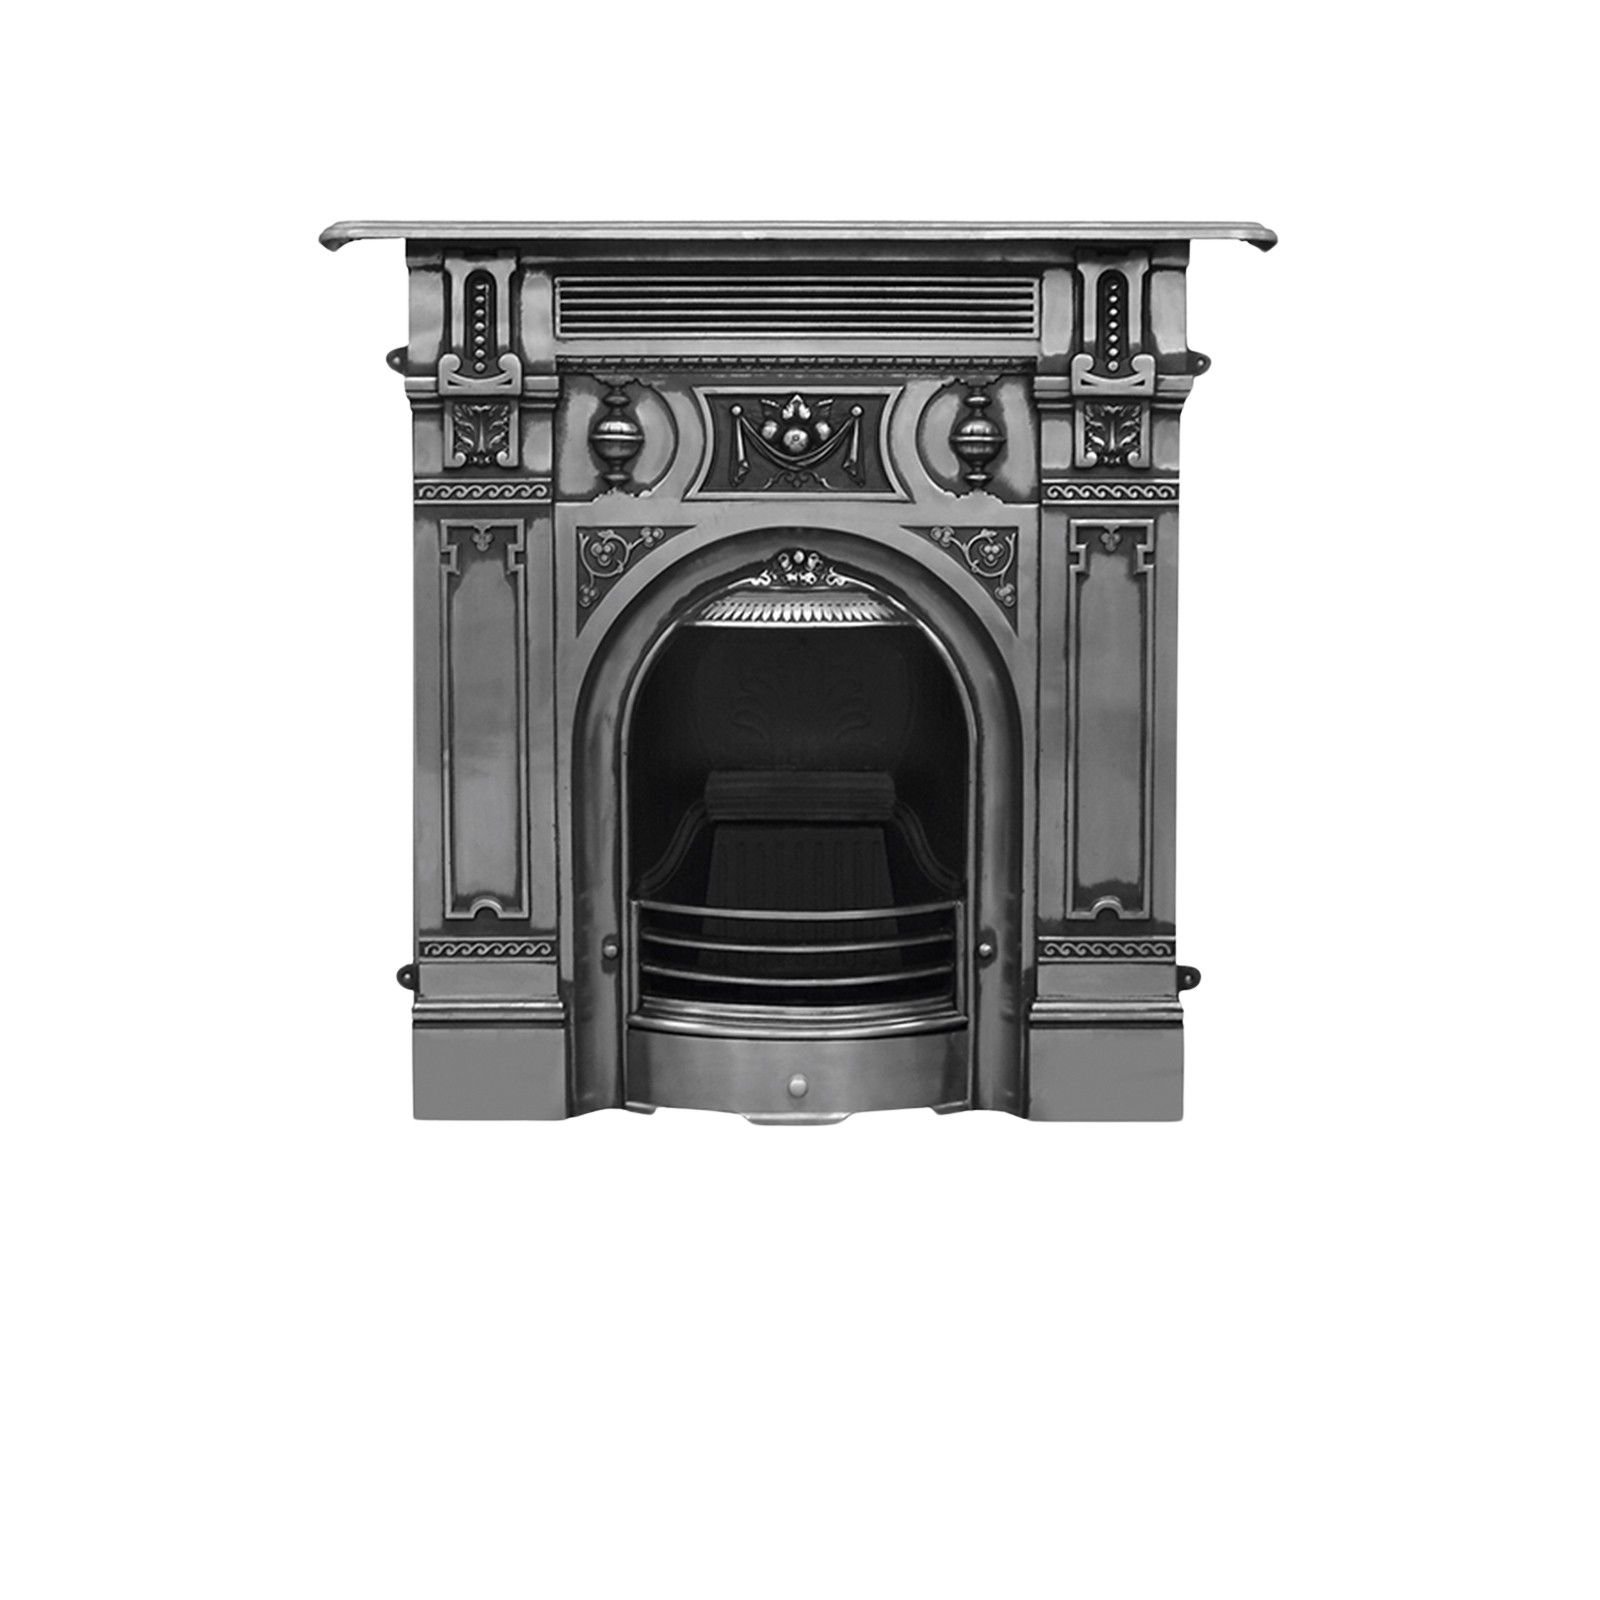 The Large Victorian style cast iron fireplace